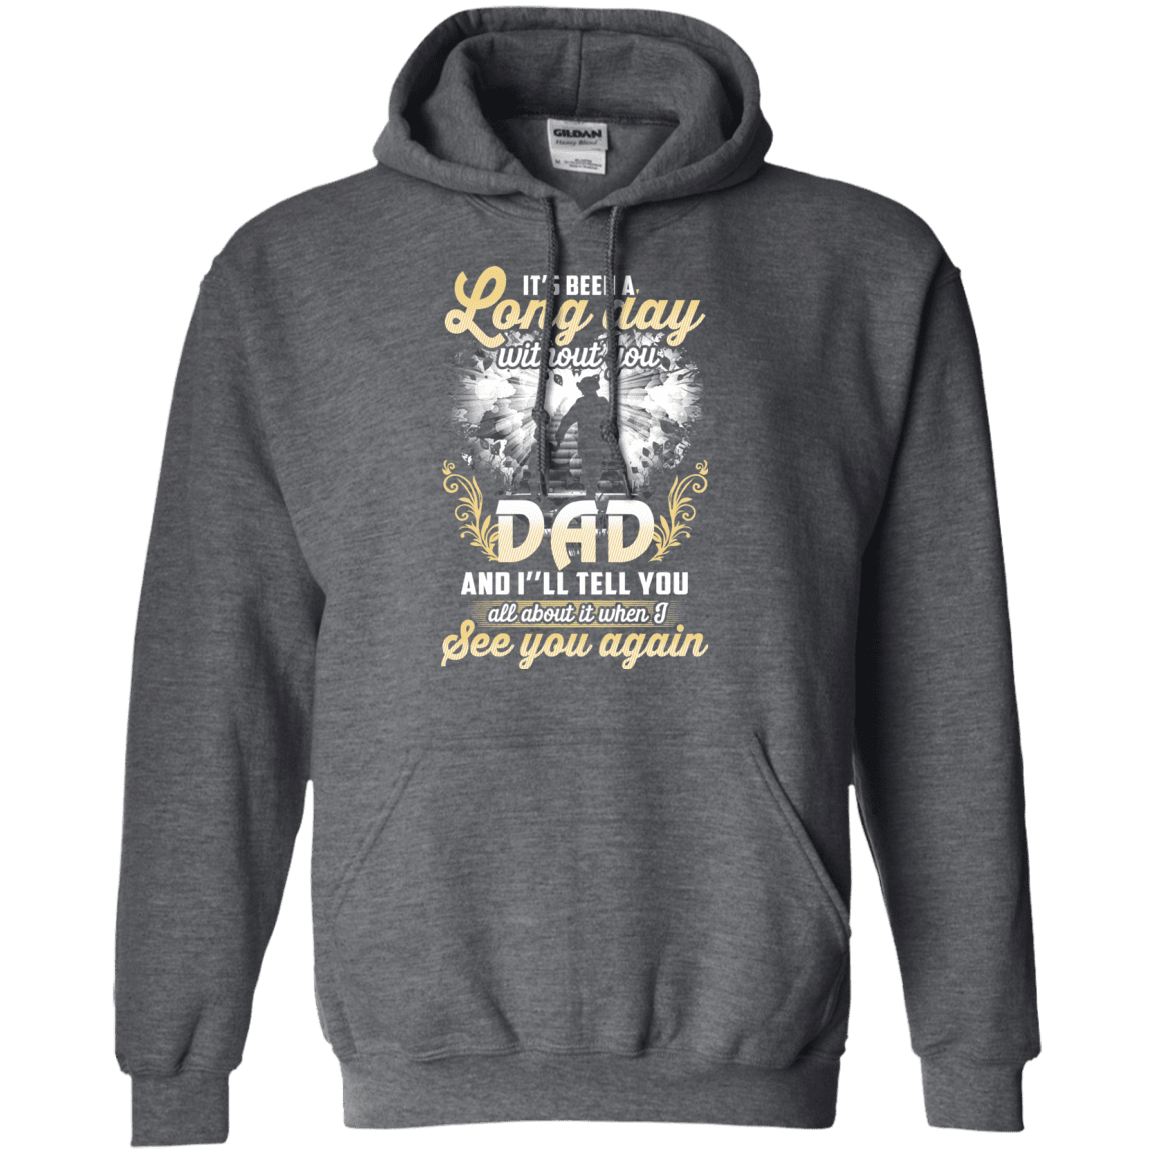 Military T-Shirt "IT'S BEEN LONG DAY WITHOUT YOU DAD SEE YOU AGAIN"-TShirt-General-Veterans Nation